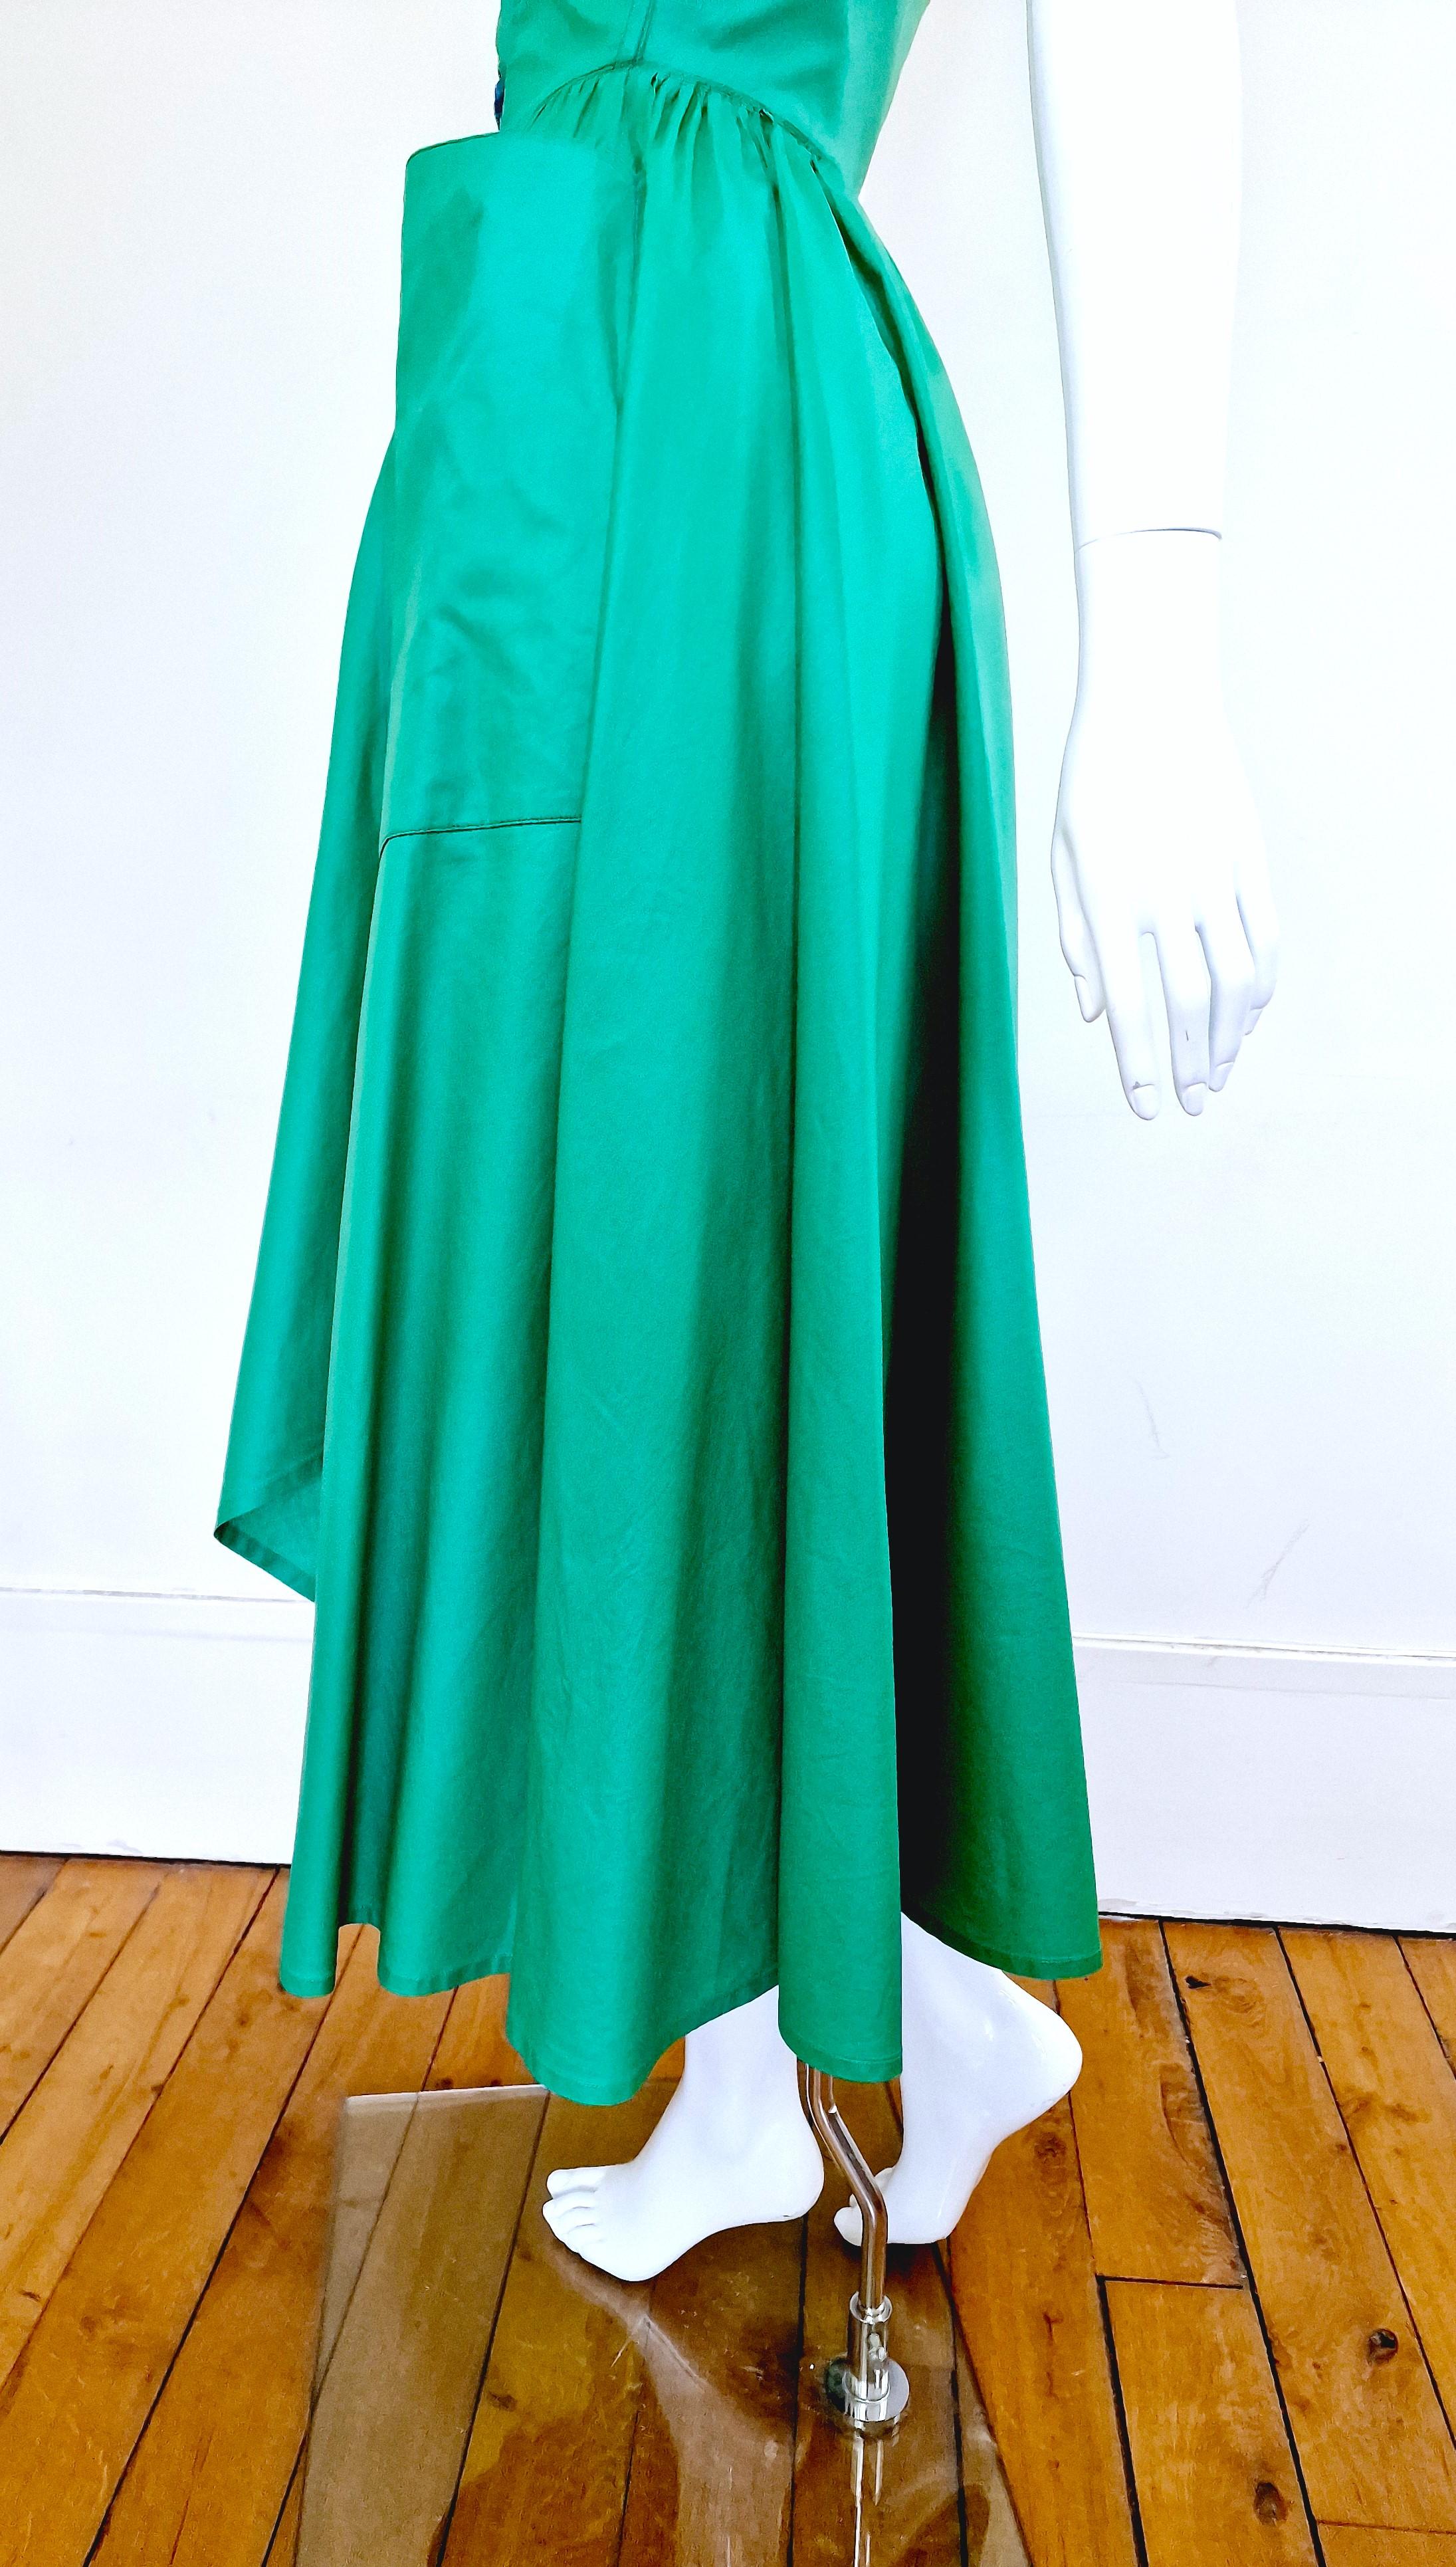 Thierry Mugler Corset Lace Up Green Vintage Couture Gown Prom Bustier Dress en vente 6